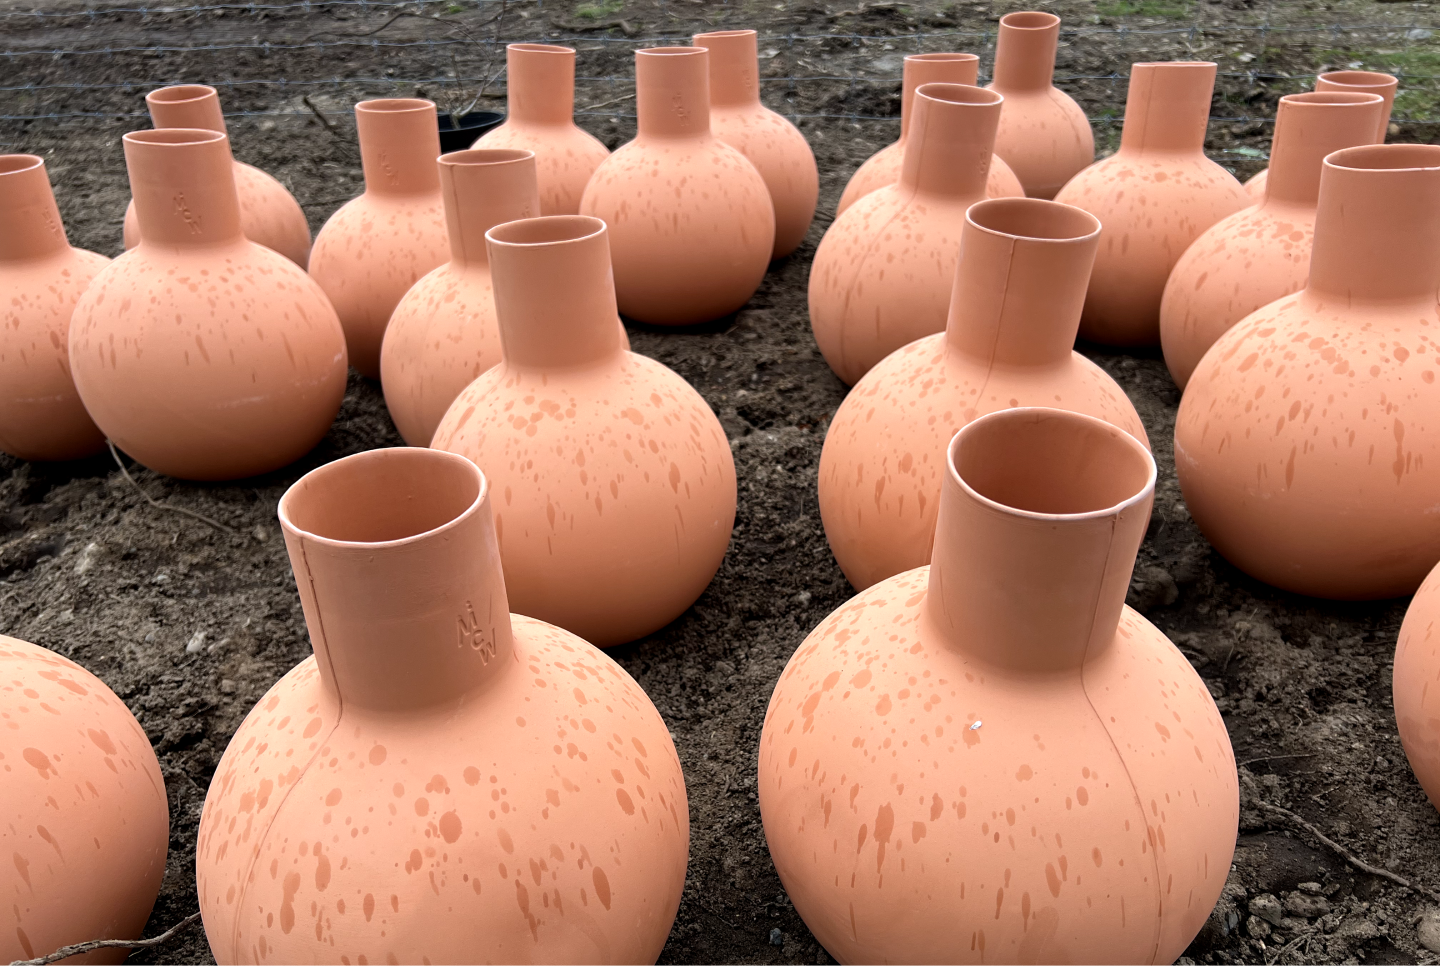 Many large terra cotta pots specially designed to release water